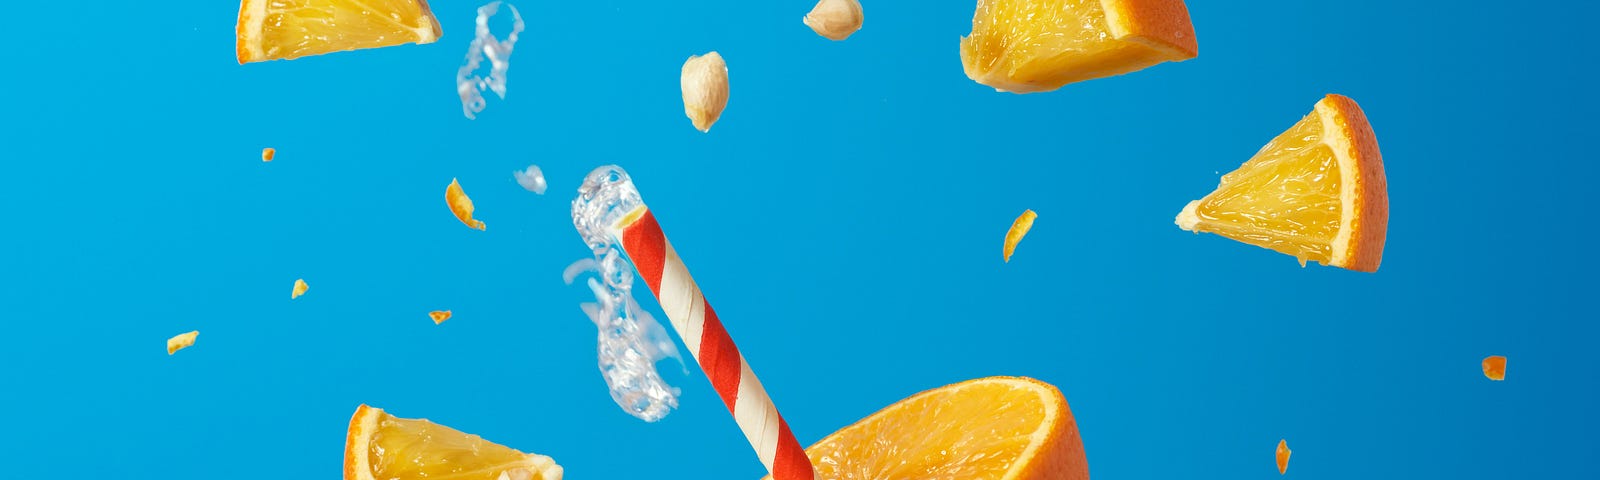 An orange sliced into pieces, with a straw emerging from one. Blue background.